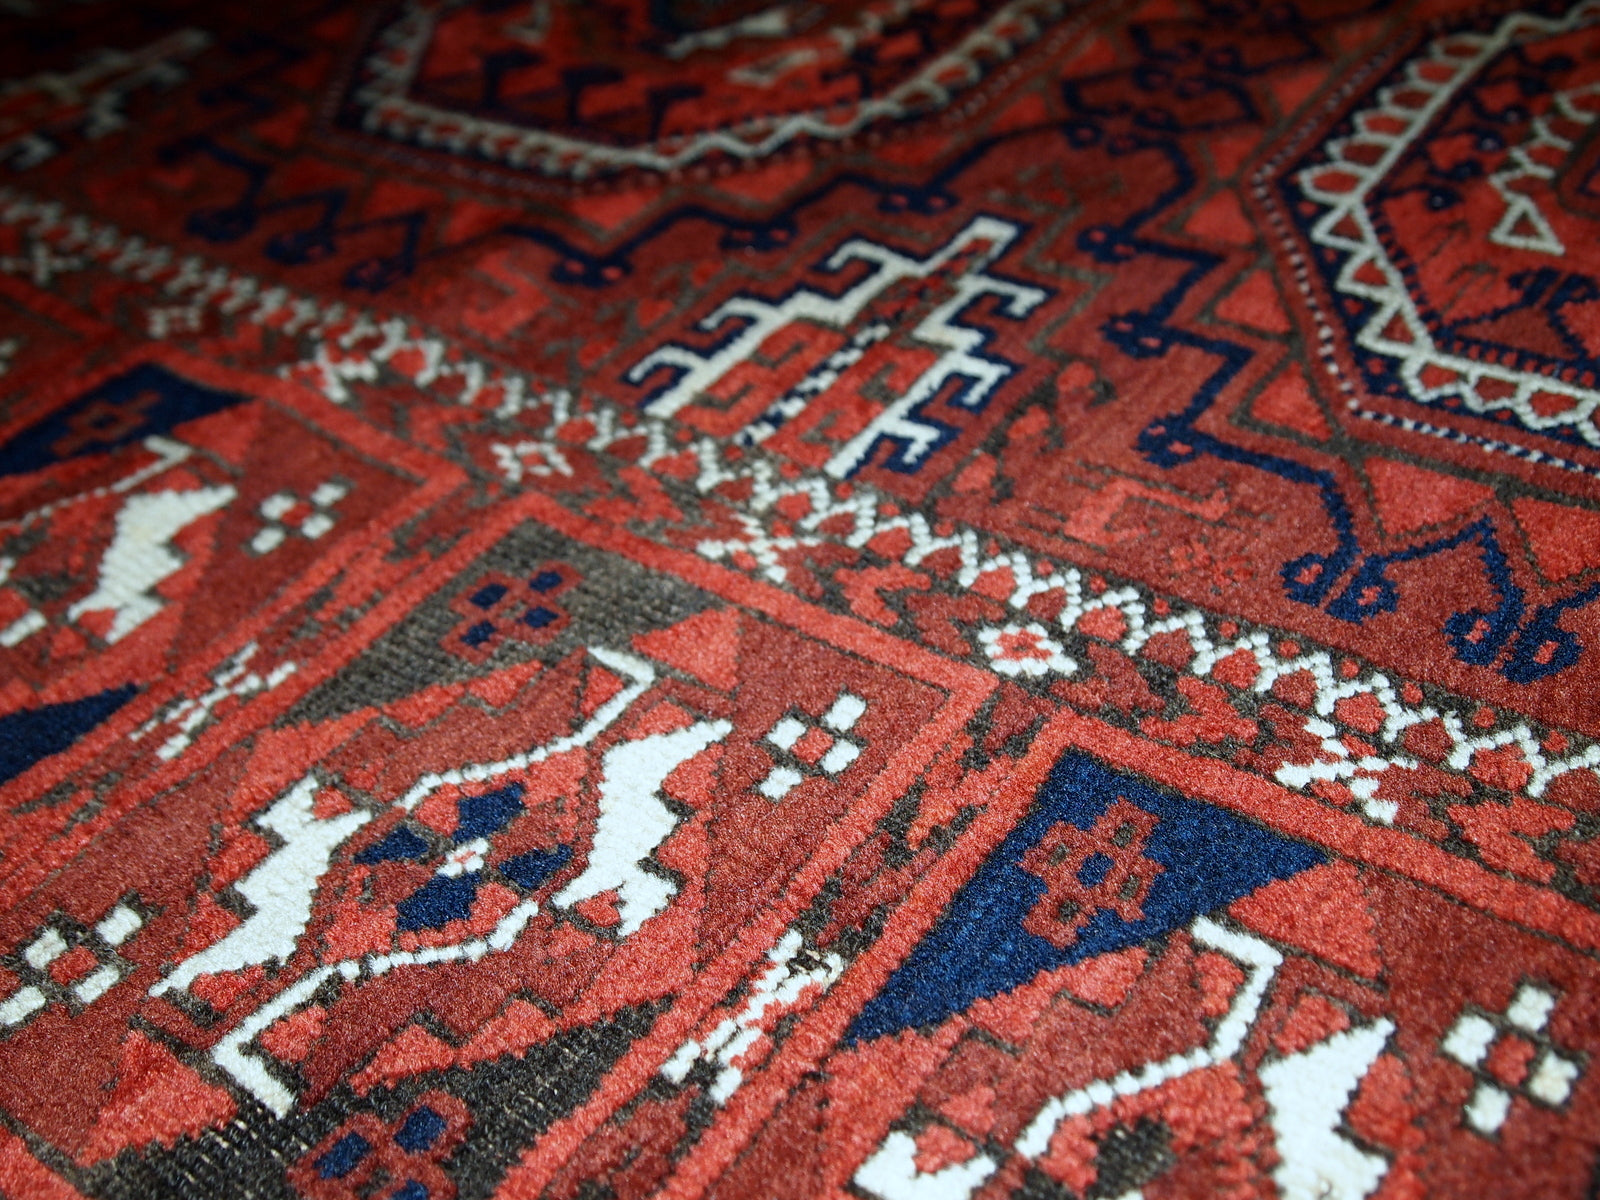 Antique hand made Afghan Baluch rug in original condition, has some age wear. The rug is in traditional deep burgundy shade with navy blue and white accents, has very rich combination of colors. 